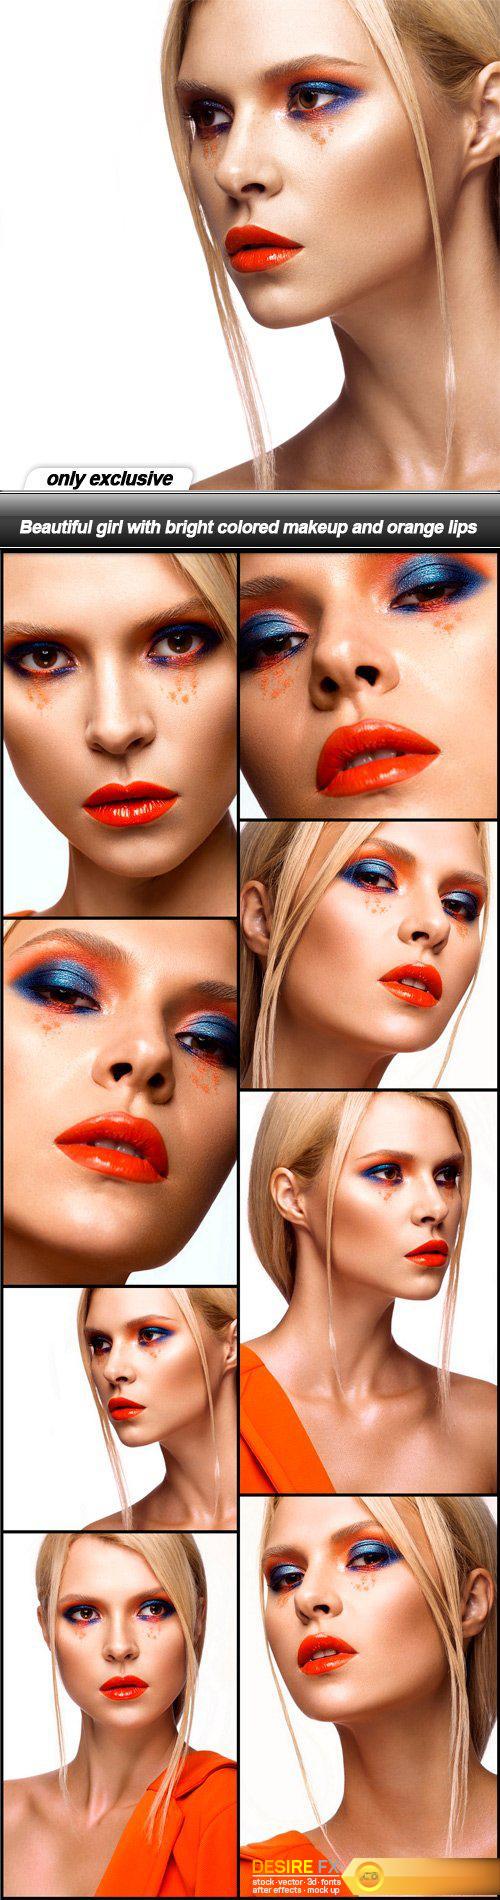 Beautiful girl with bright colored makeup and orange lips - 8 UHQ JPEG